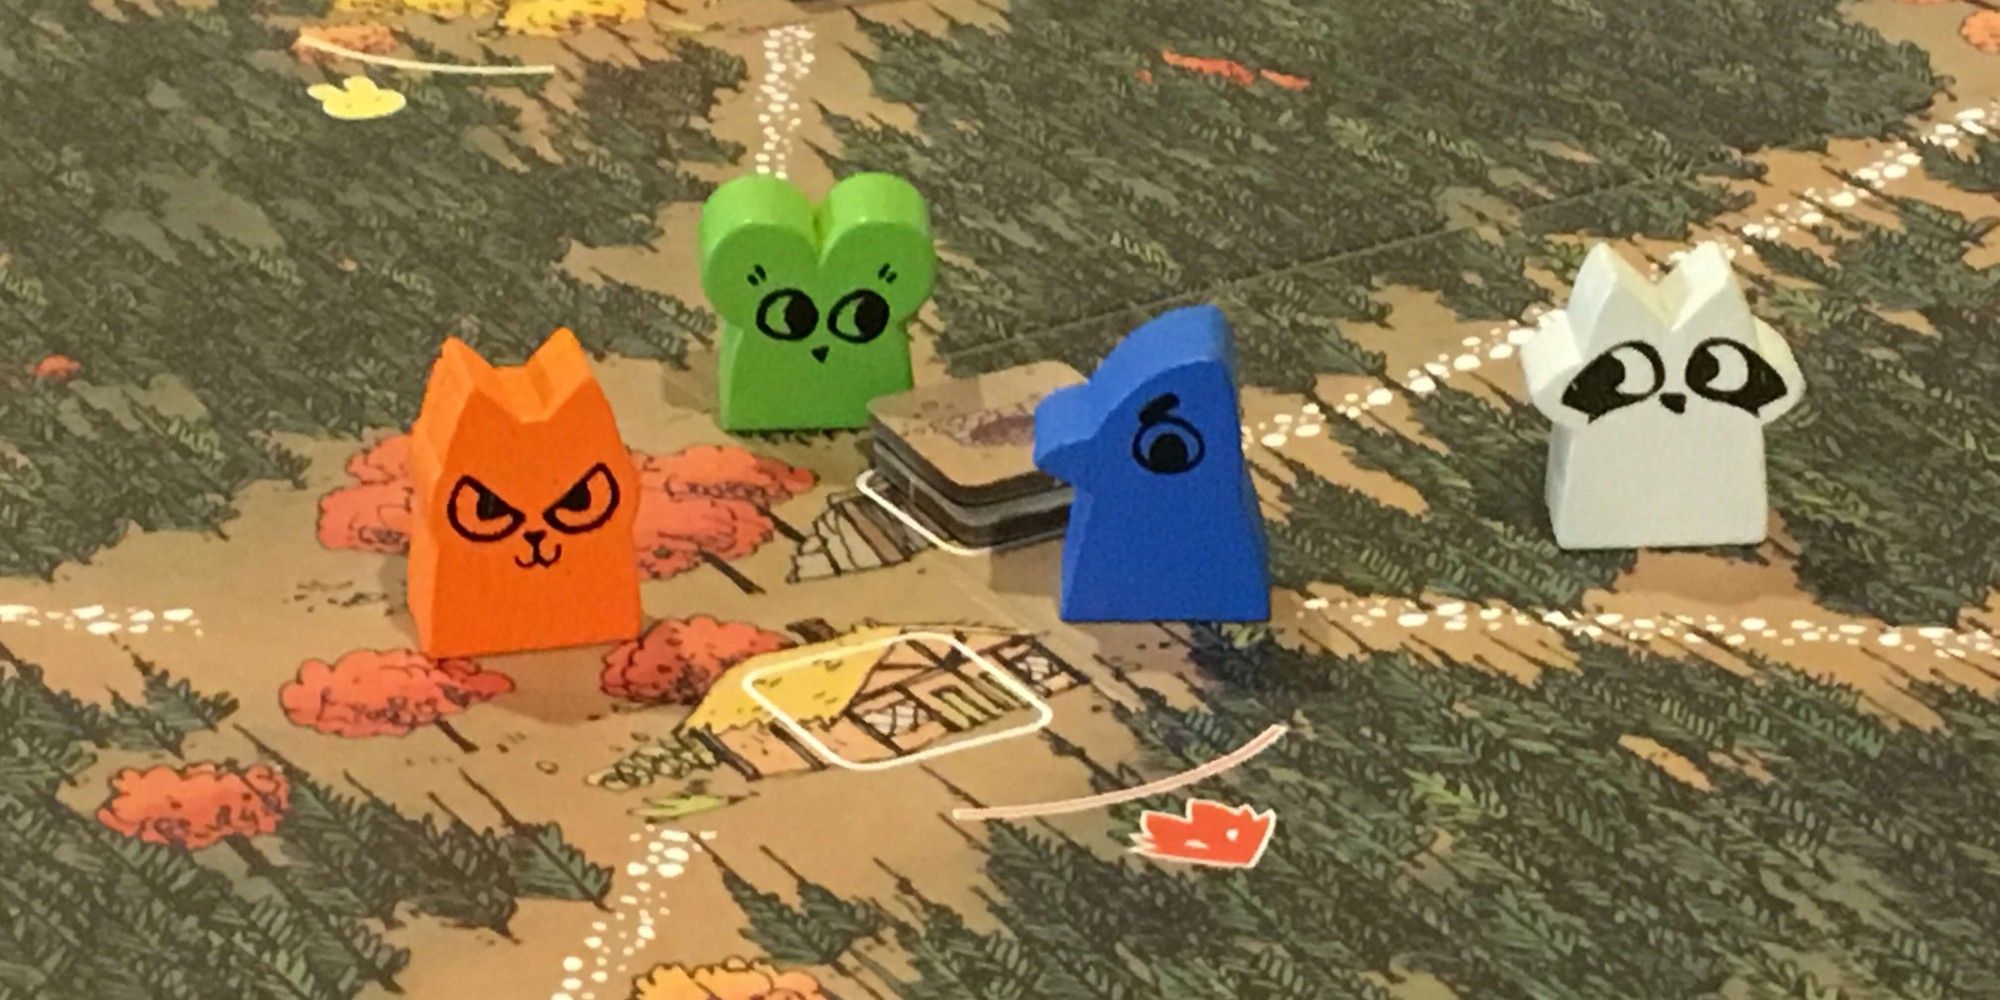 Route board game, four different meeples on a jungle map